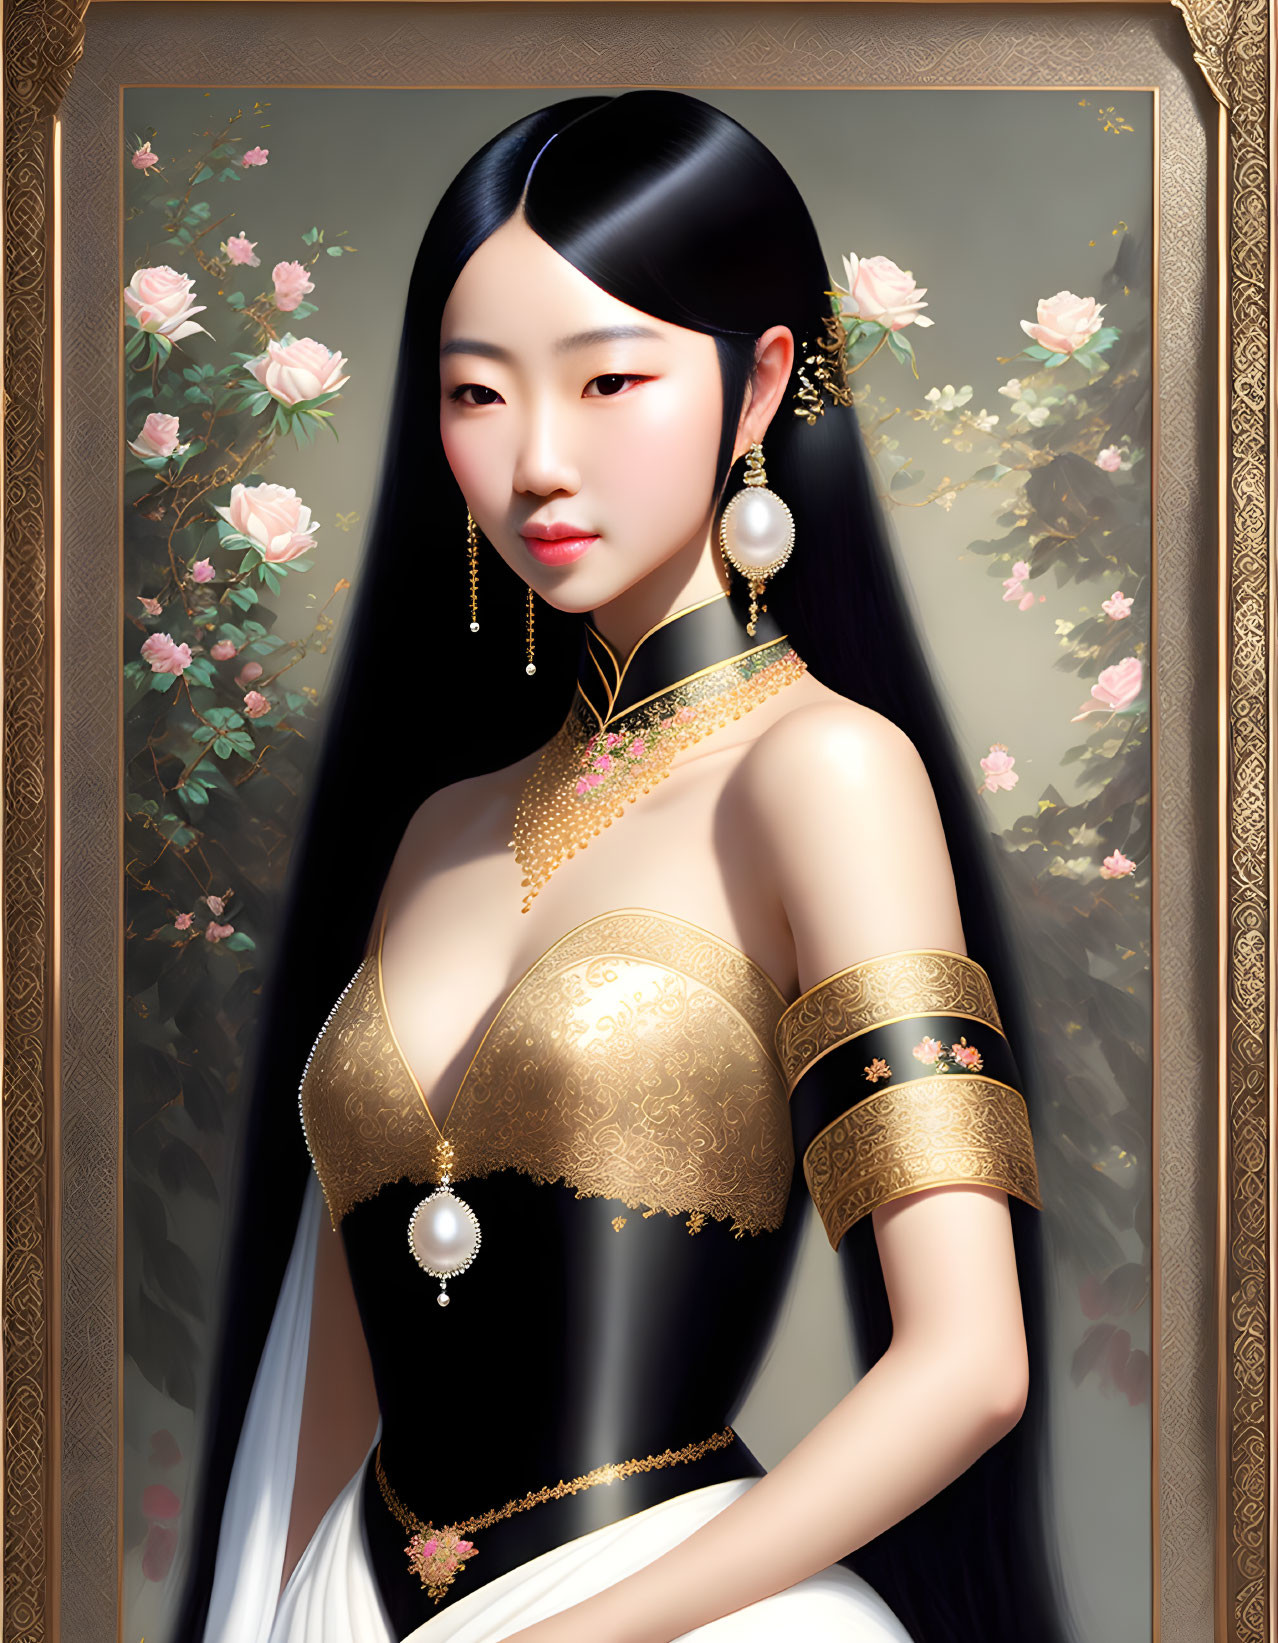 Digital portrait of woman with long black hair in black and gold outfit, jewelry, roses, and golden